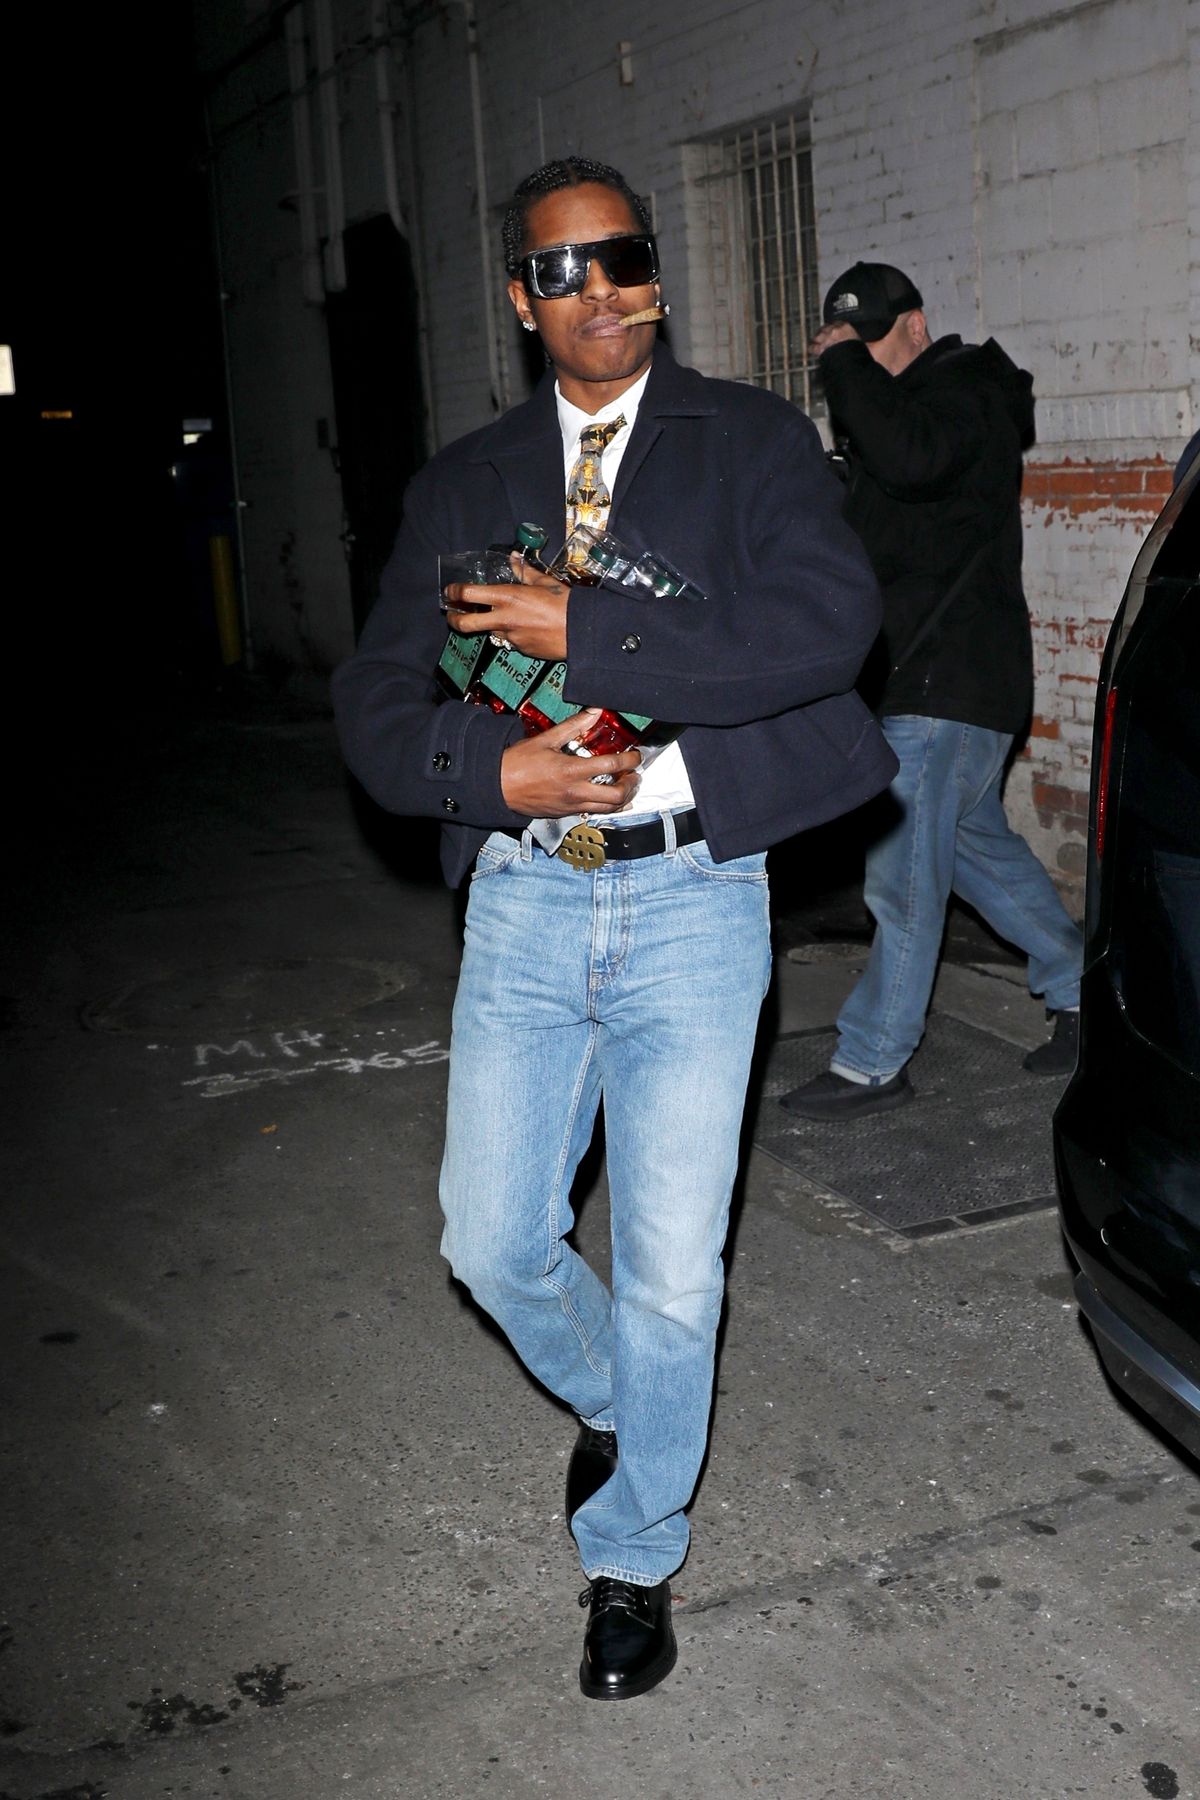 bevelry hills, ca exclusive rihanna a$ap rocky enjoy a date night in beverly hills days after showing off their baby boy to the world a$ap rocky came out with an arm full of his brand of cogniac “mercer prince'' the rapper has joined many others in the spirits game, putting his name to an affordable $38 a bottle blended canadian whisky the couple kept their look dressed up causal both sporting jeans with the fenty mogul pairing her denim with a large coat and a t shirt that read missing parents advisory rocky dressed up his jeans with a blazer, white shirt and tie and a belt with dollar sign bucklepictured rihanna, asap rockybackgrid usa 20 december 2022 usa 1 310 798 9111 usasalesbackgridcomuk 44 208 344 2007 uksalesbackgridcomuk clients pictures containing childrenplease pixelate face prior to publication